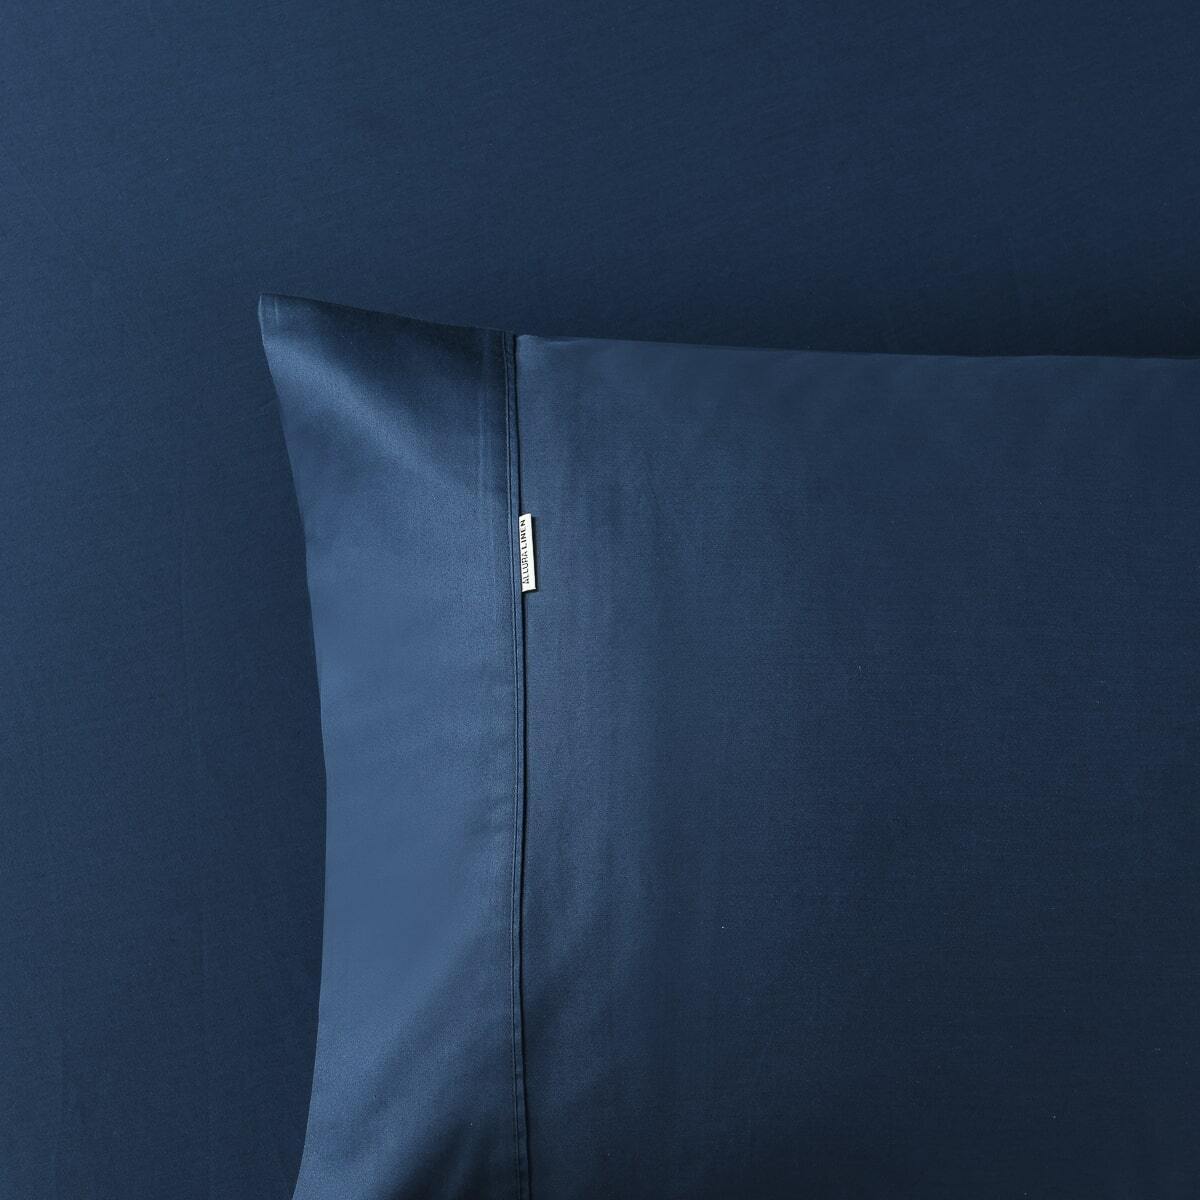 King Size Pillow Case - 400 Thread Count Navy